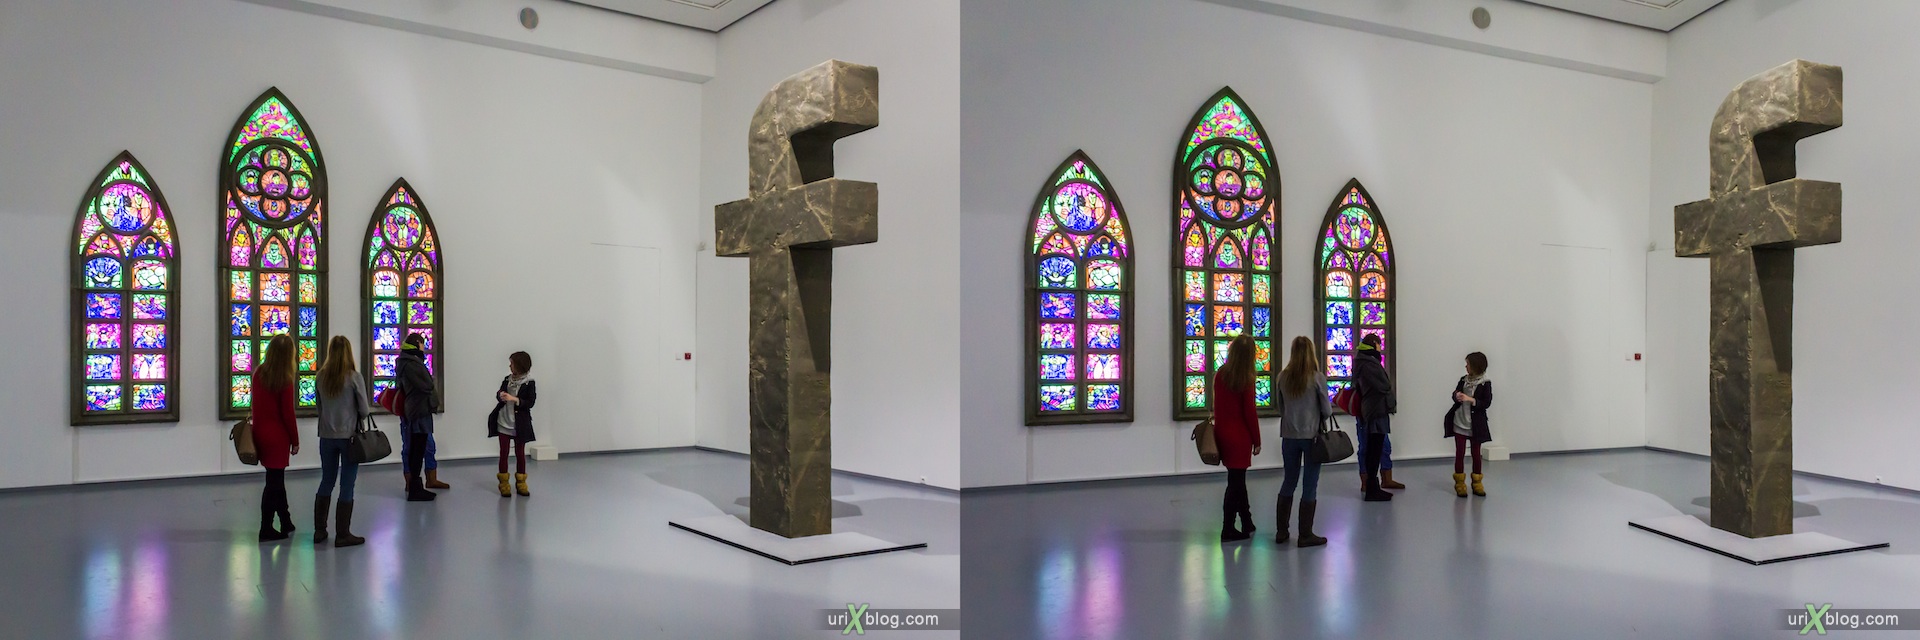 2013, facebook, Multimedia Art Museum, Moscow, Russia, statue, sculpture, exhibition, 3D, stereo pair, cross-eyed, crossview, cross view stereo pair